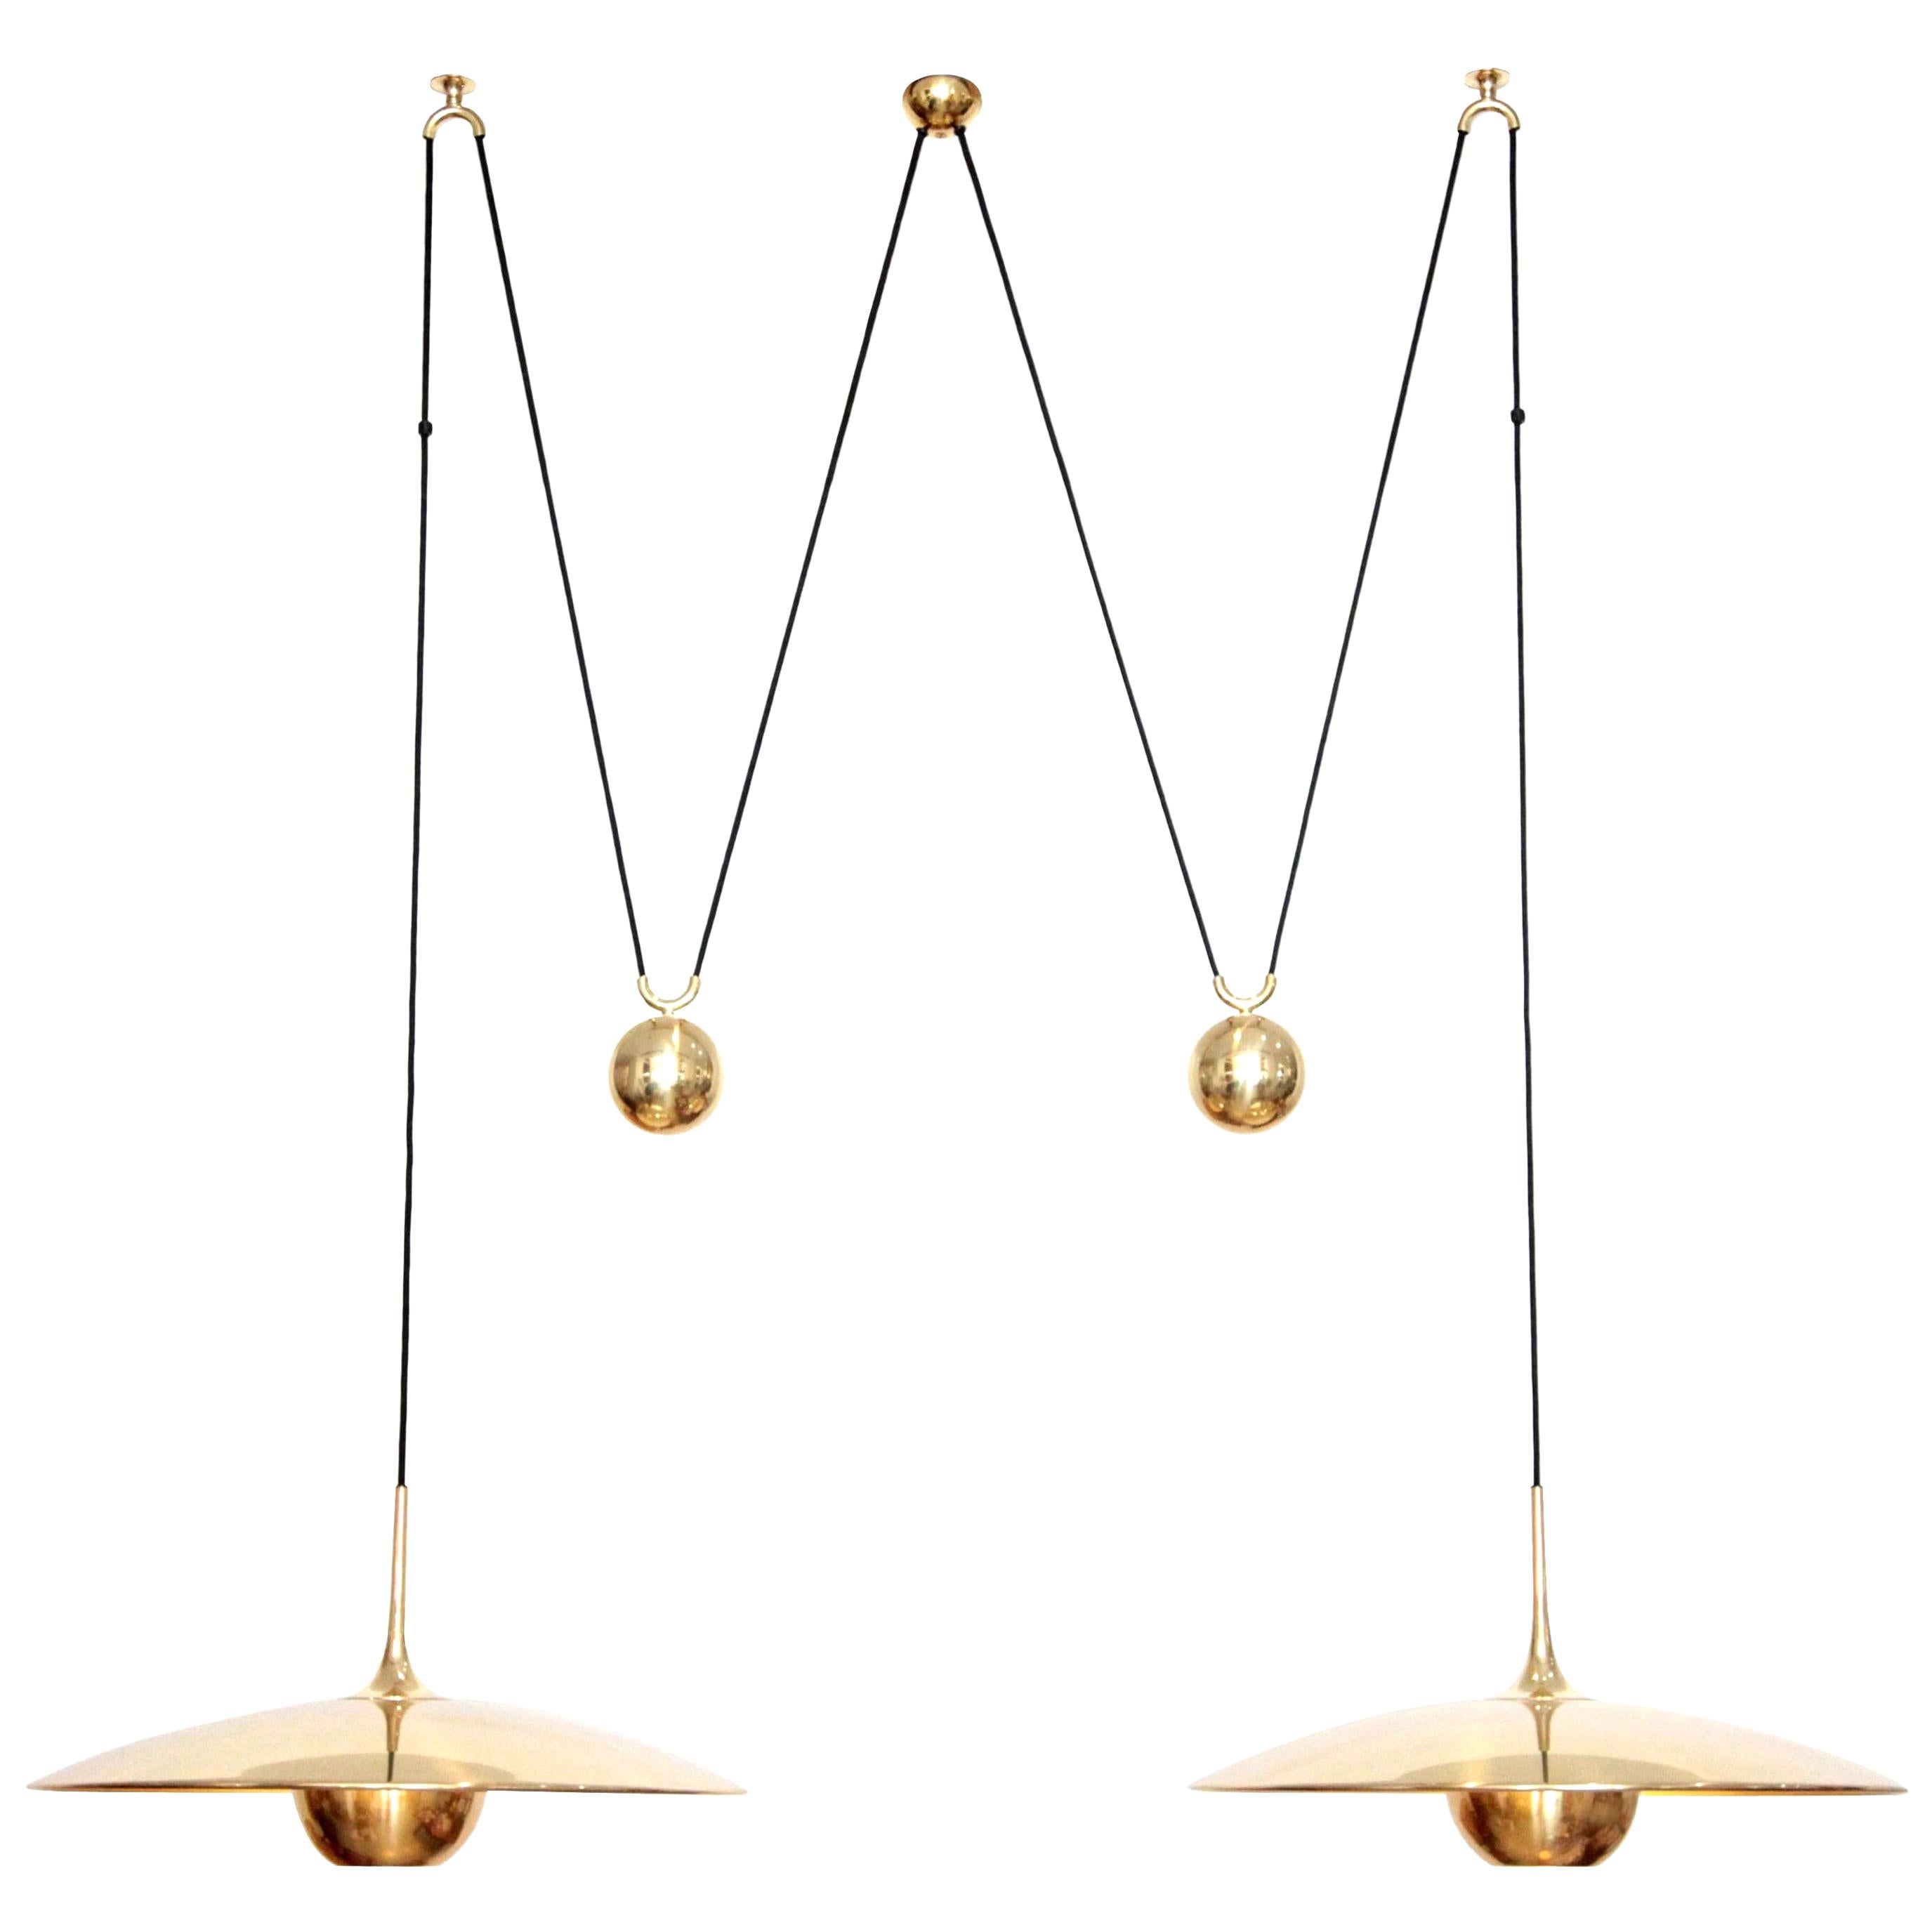 Florian Schulz Double Onos 55-Pendant Lamp with Side Counter Weights